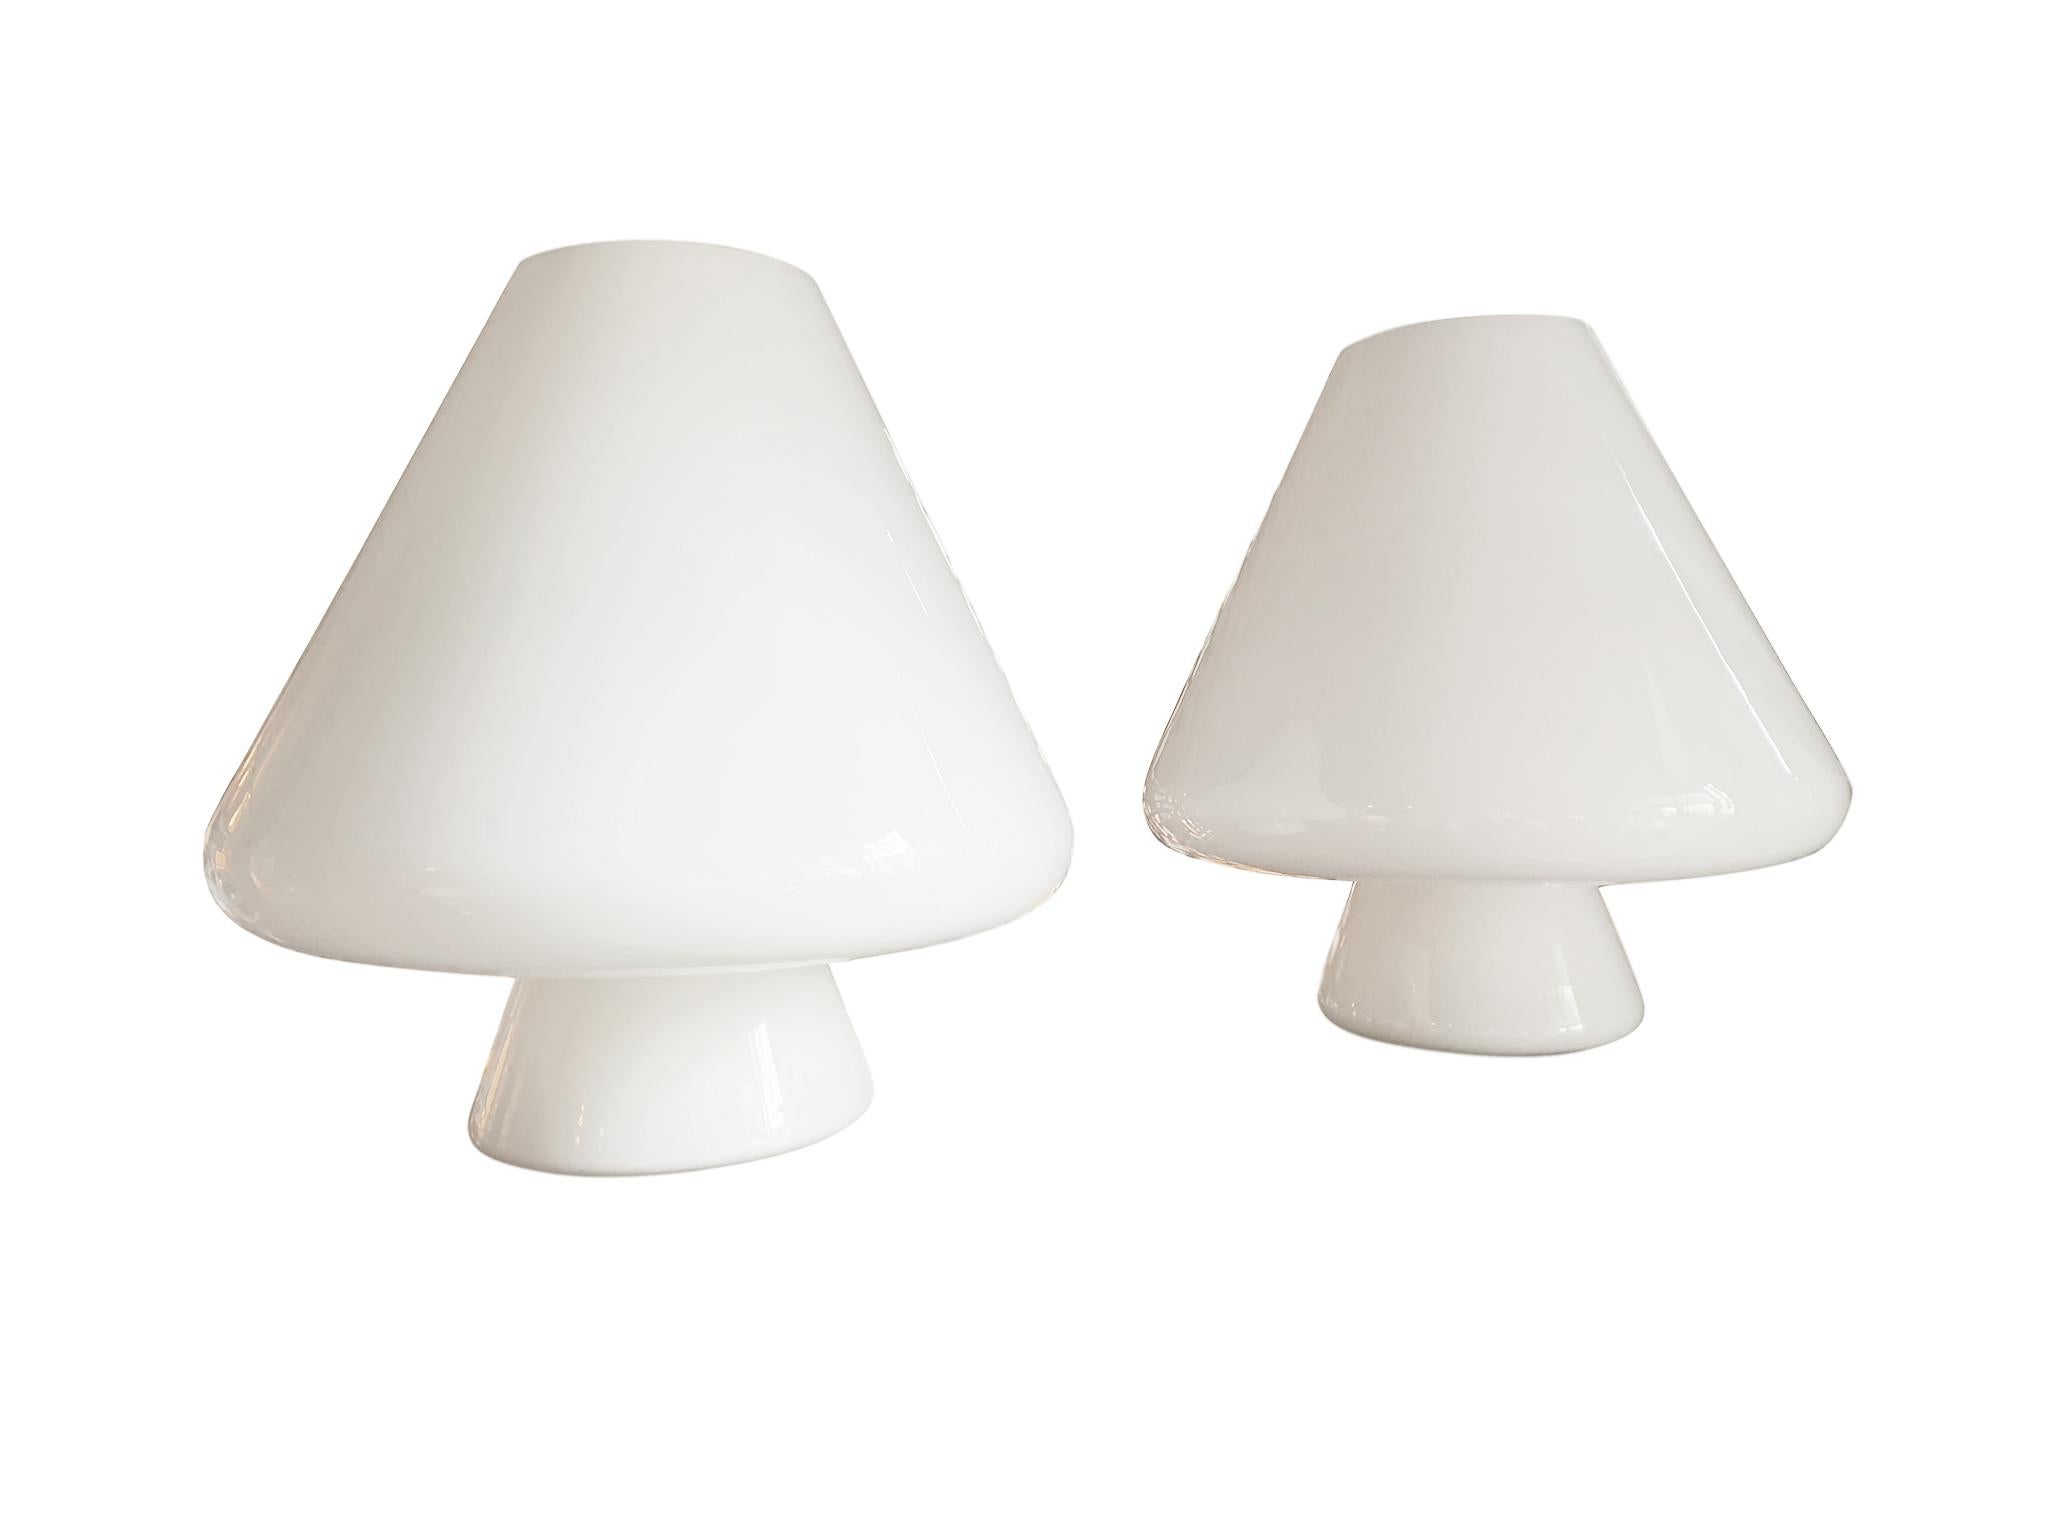 An exquisite pair of white Murano glass table lamps, remarkable for their craftsmanship and originality. hand blown in Italy, 1960s. Manufactured by Res Murano. The lamps are whimsically designed with a stout mushroom shape with coned tops and